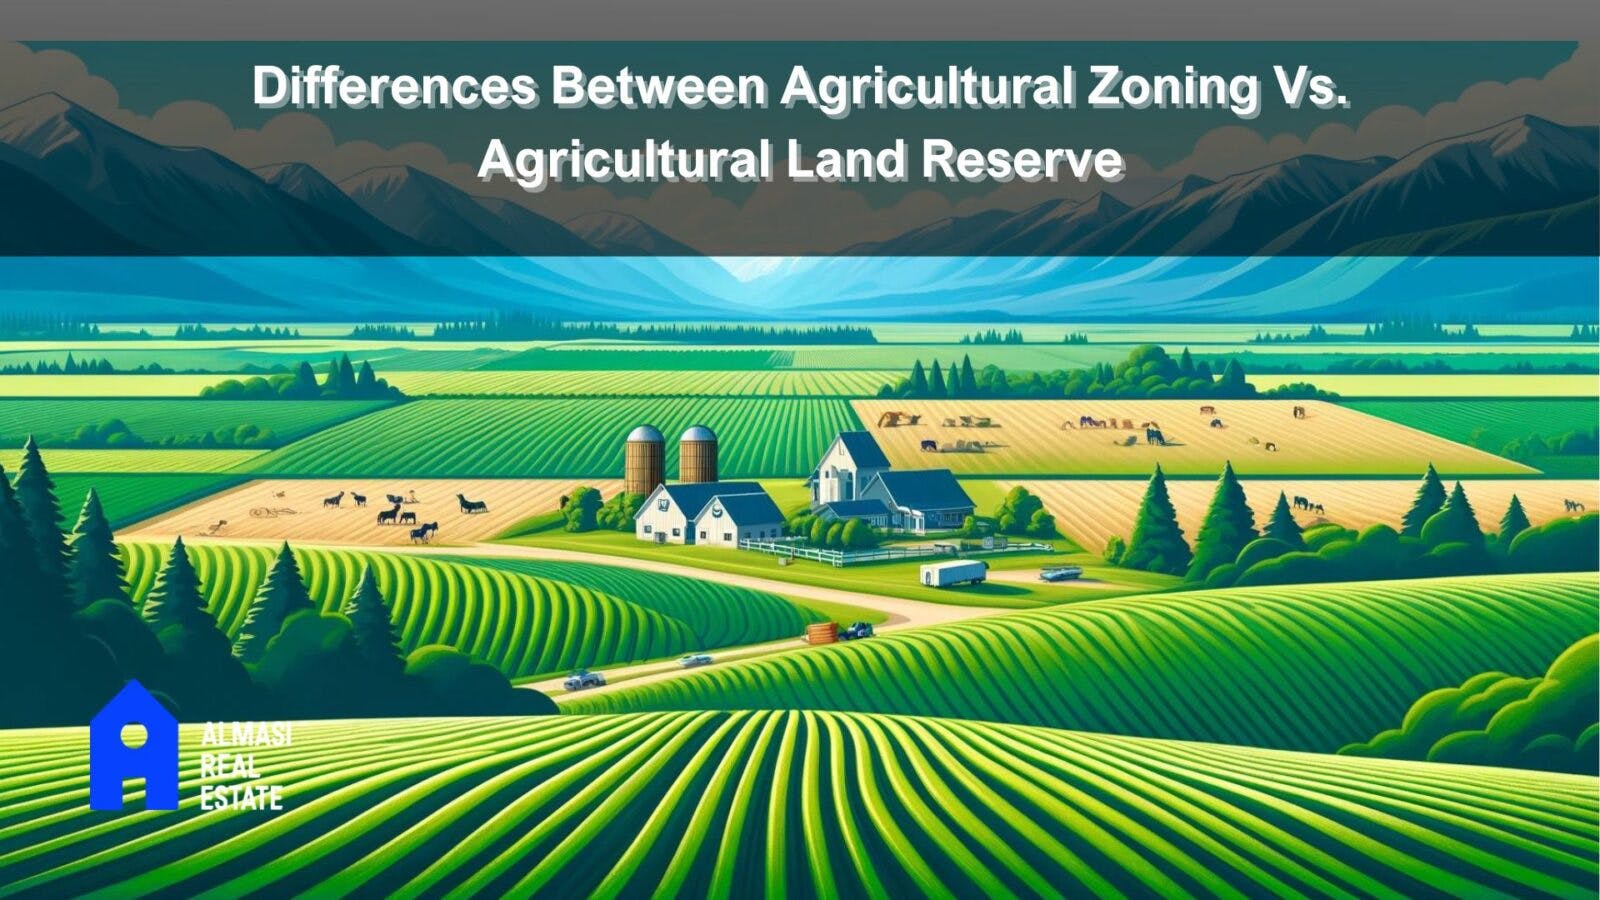 Agricultural zoning